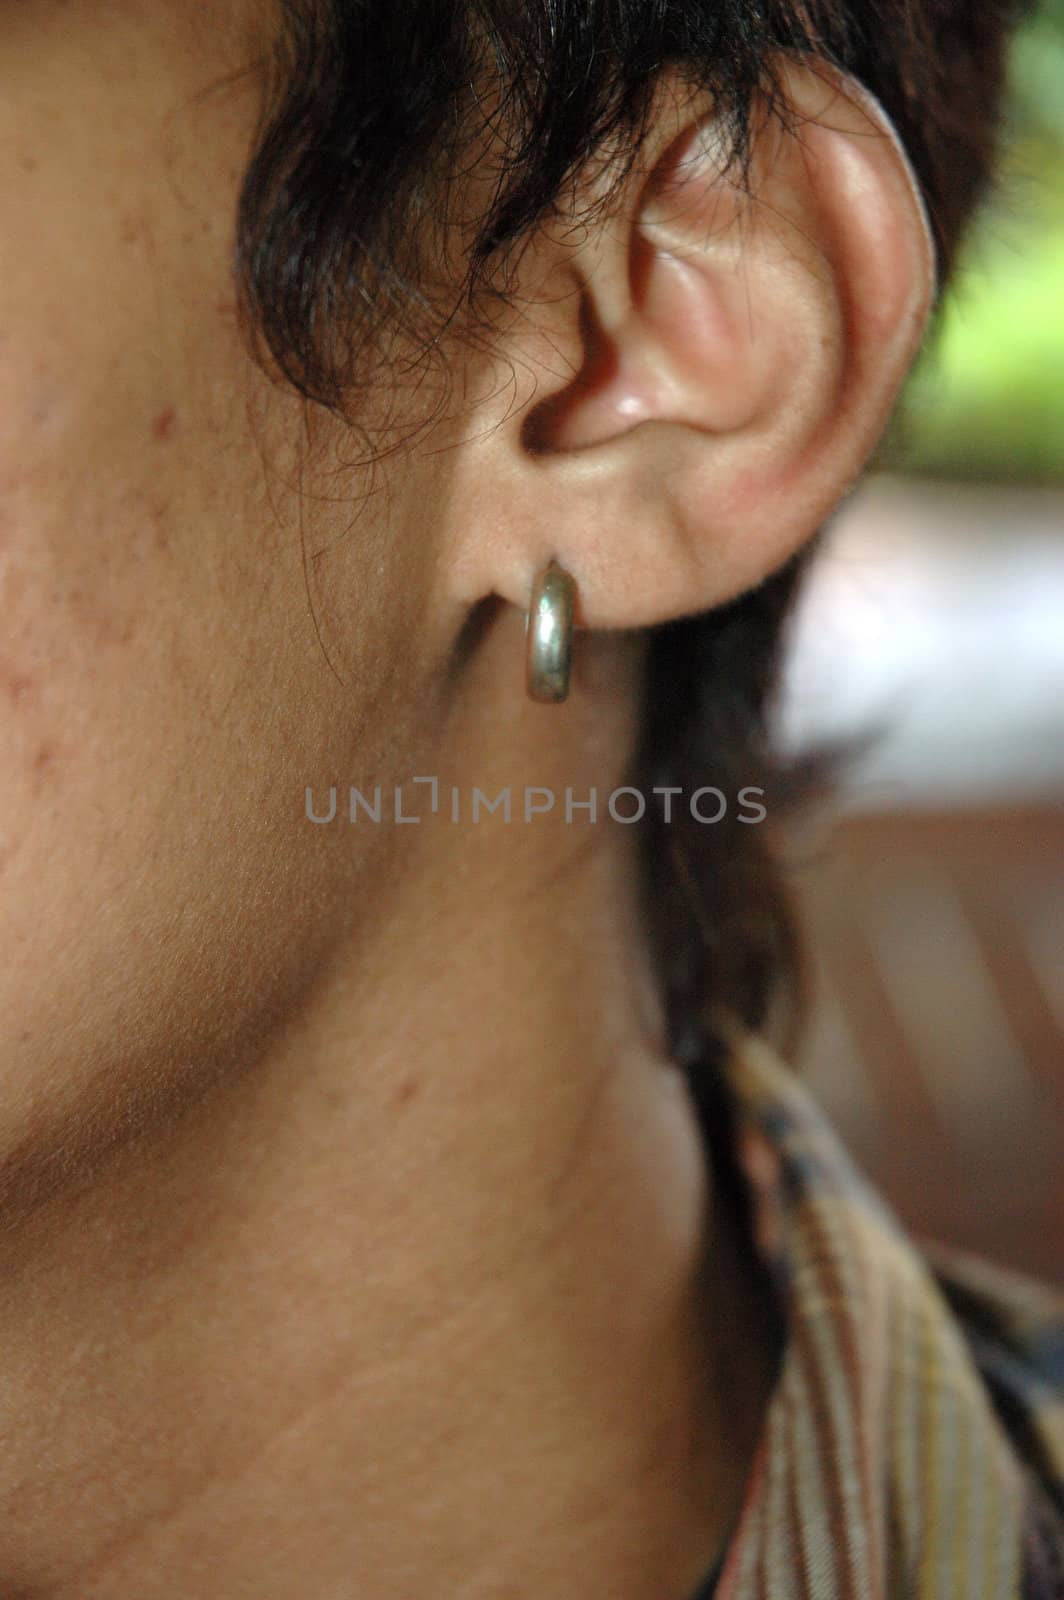 man put on earing on his left ear